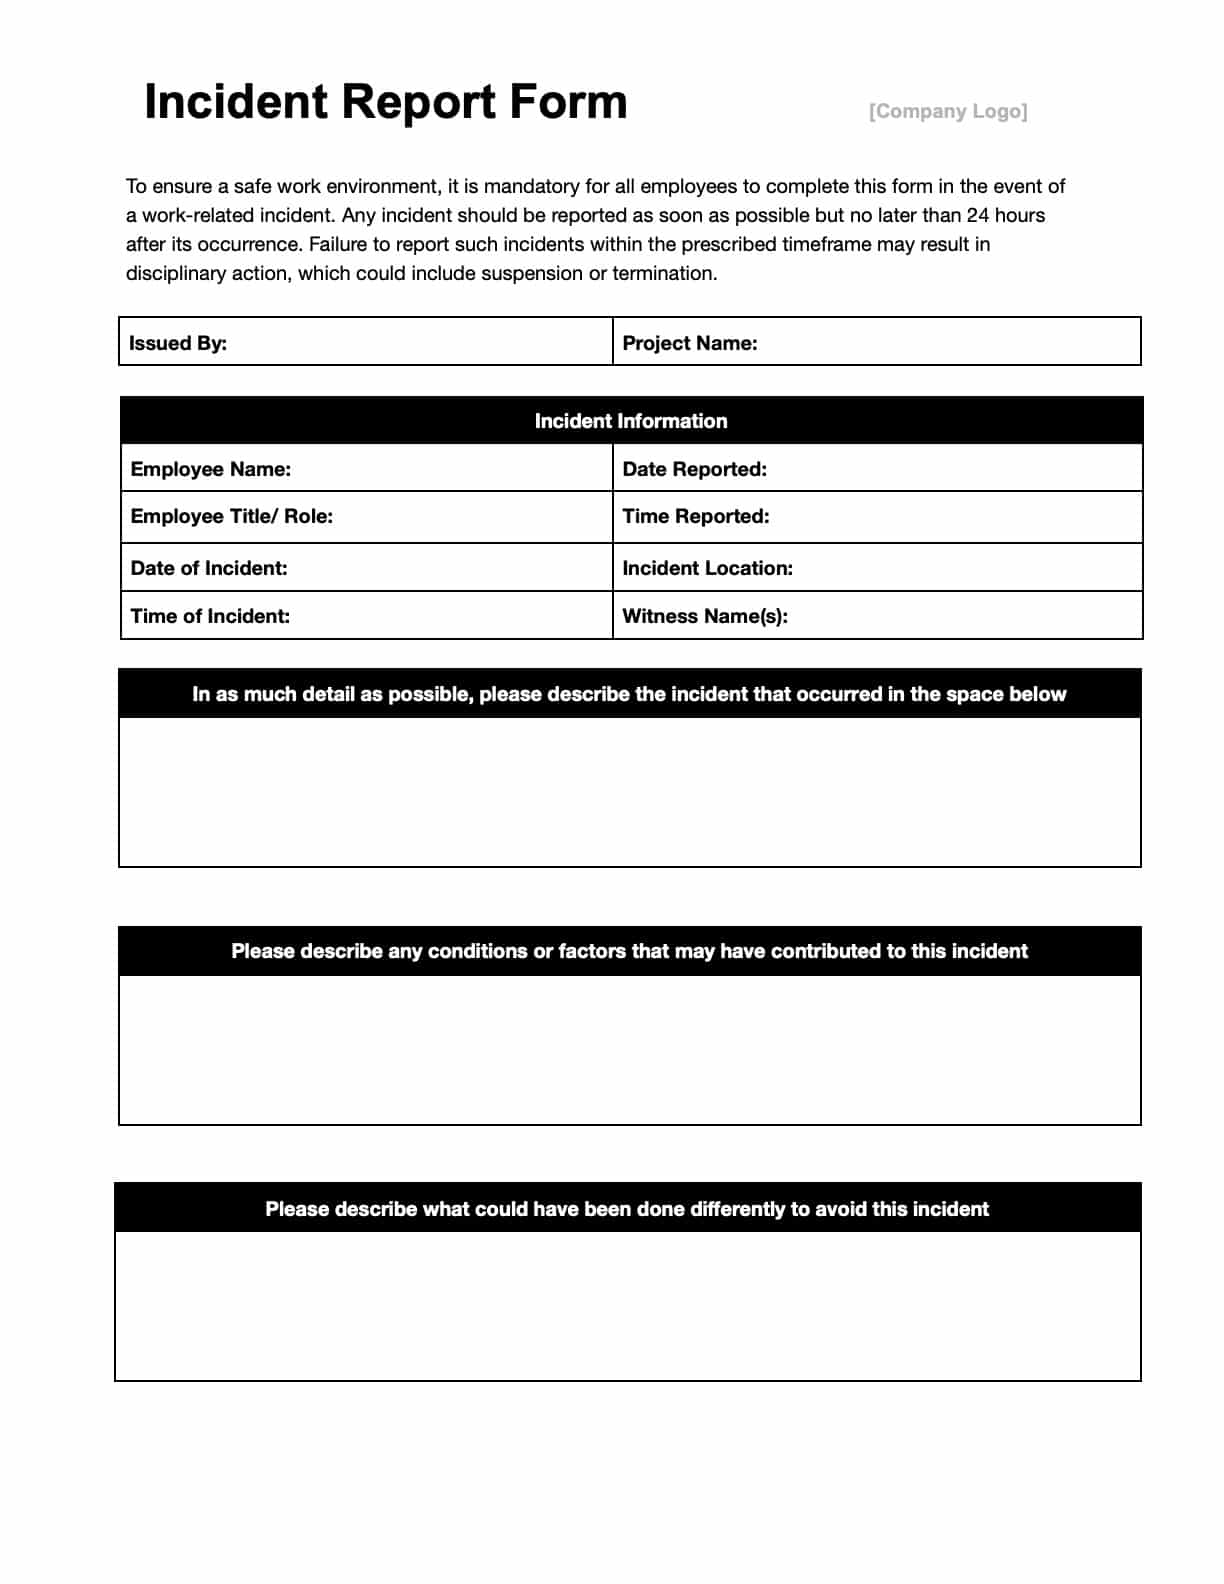 Incident Report Templates: Download Print for Free